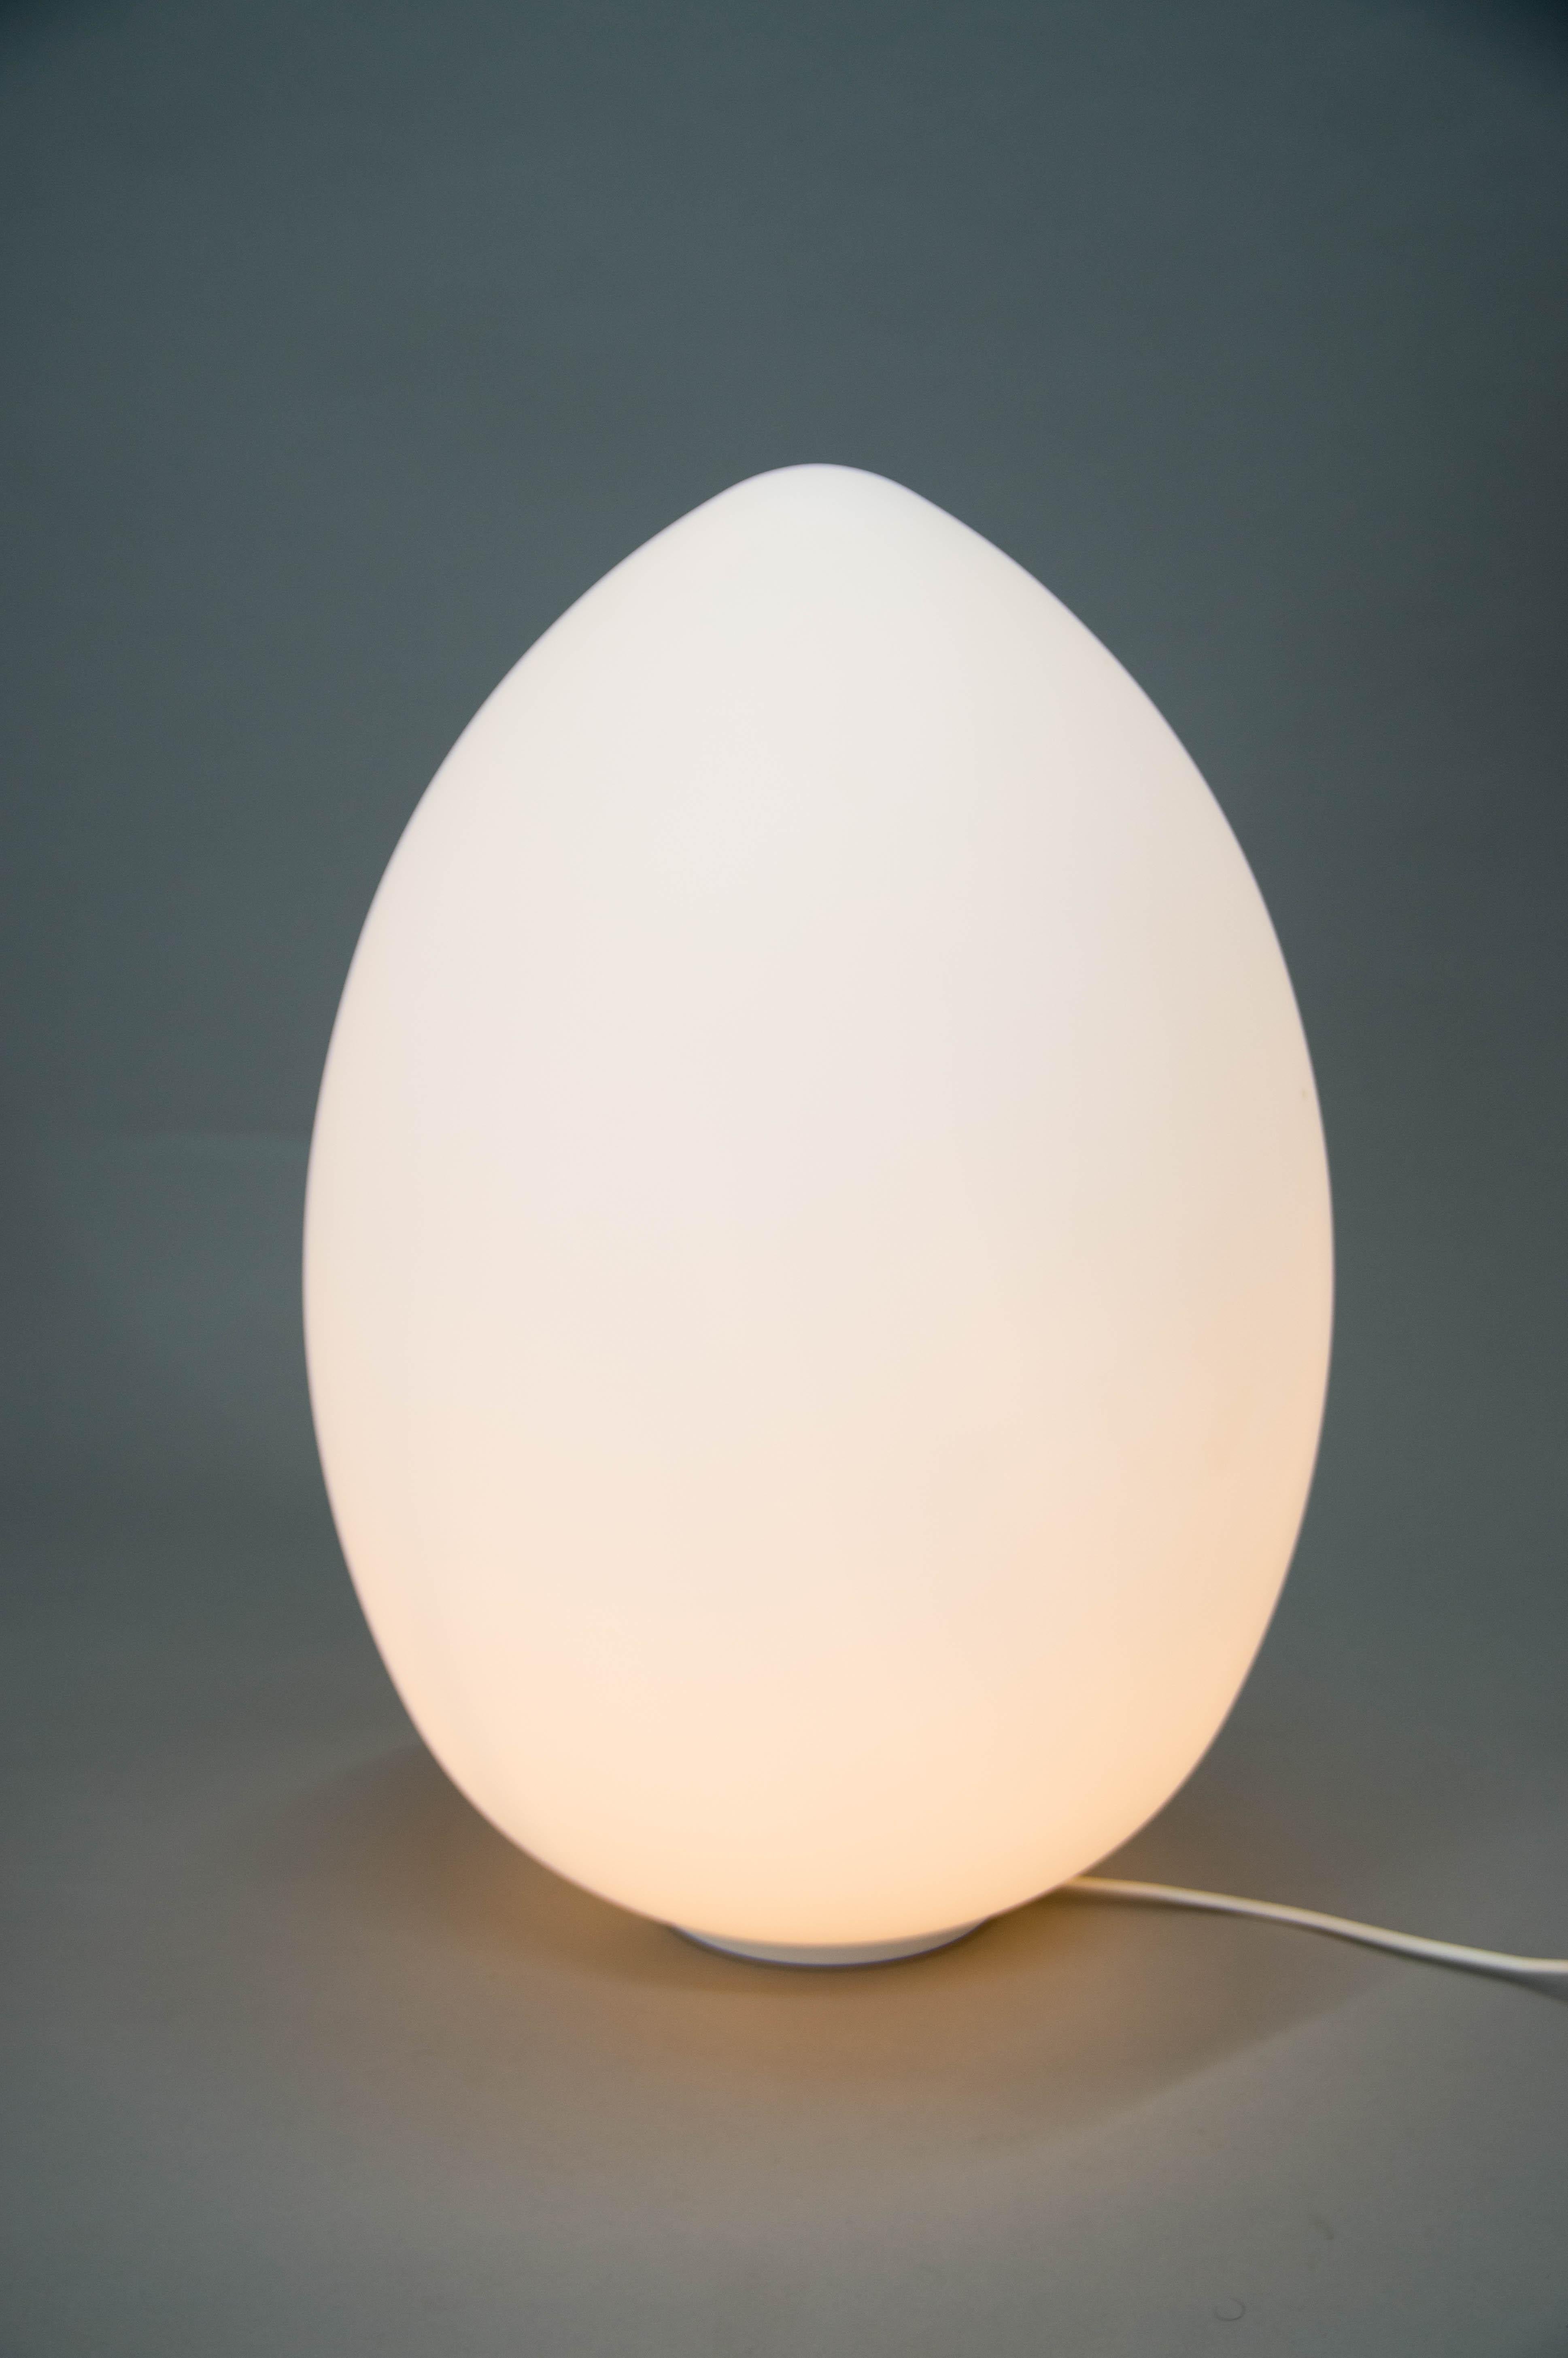 Designed in 1972 by Ben Swildens, the ‘shell’ of the egg contained a light source: an ironic idea that still works today. As in nature, the shell of the Uovo lamp is the embodiment of absolute lightness, an elegant form in white satin blown glass